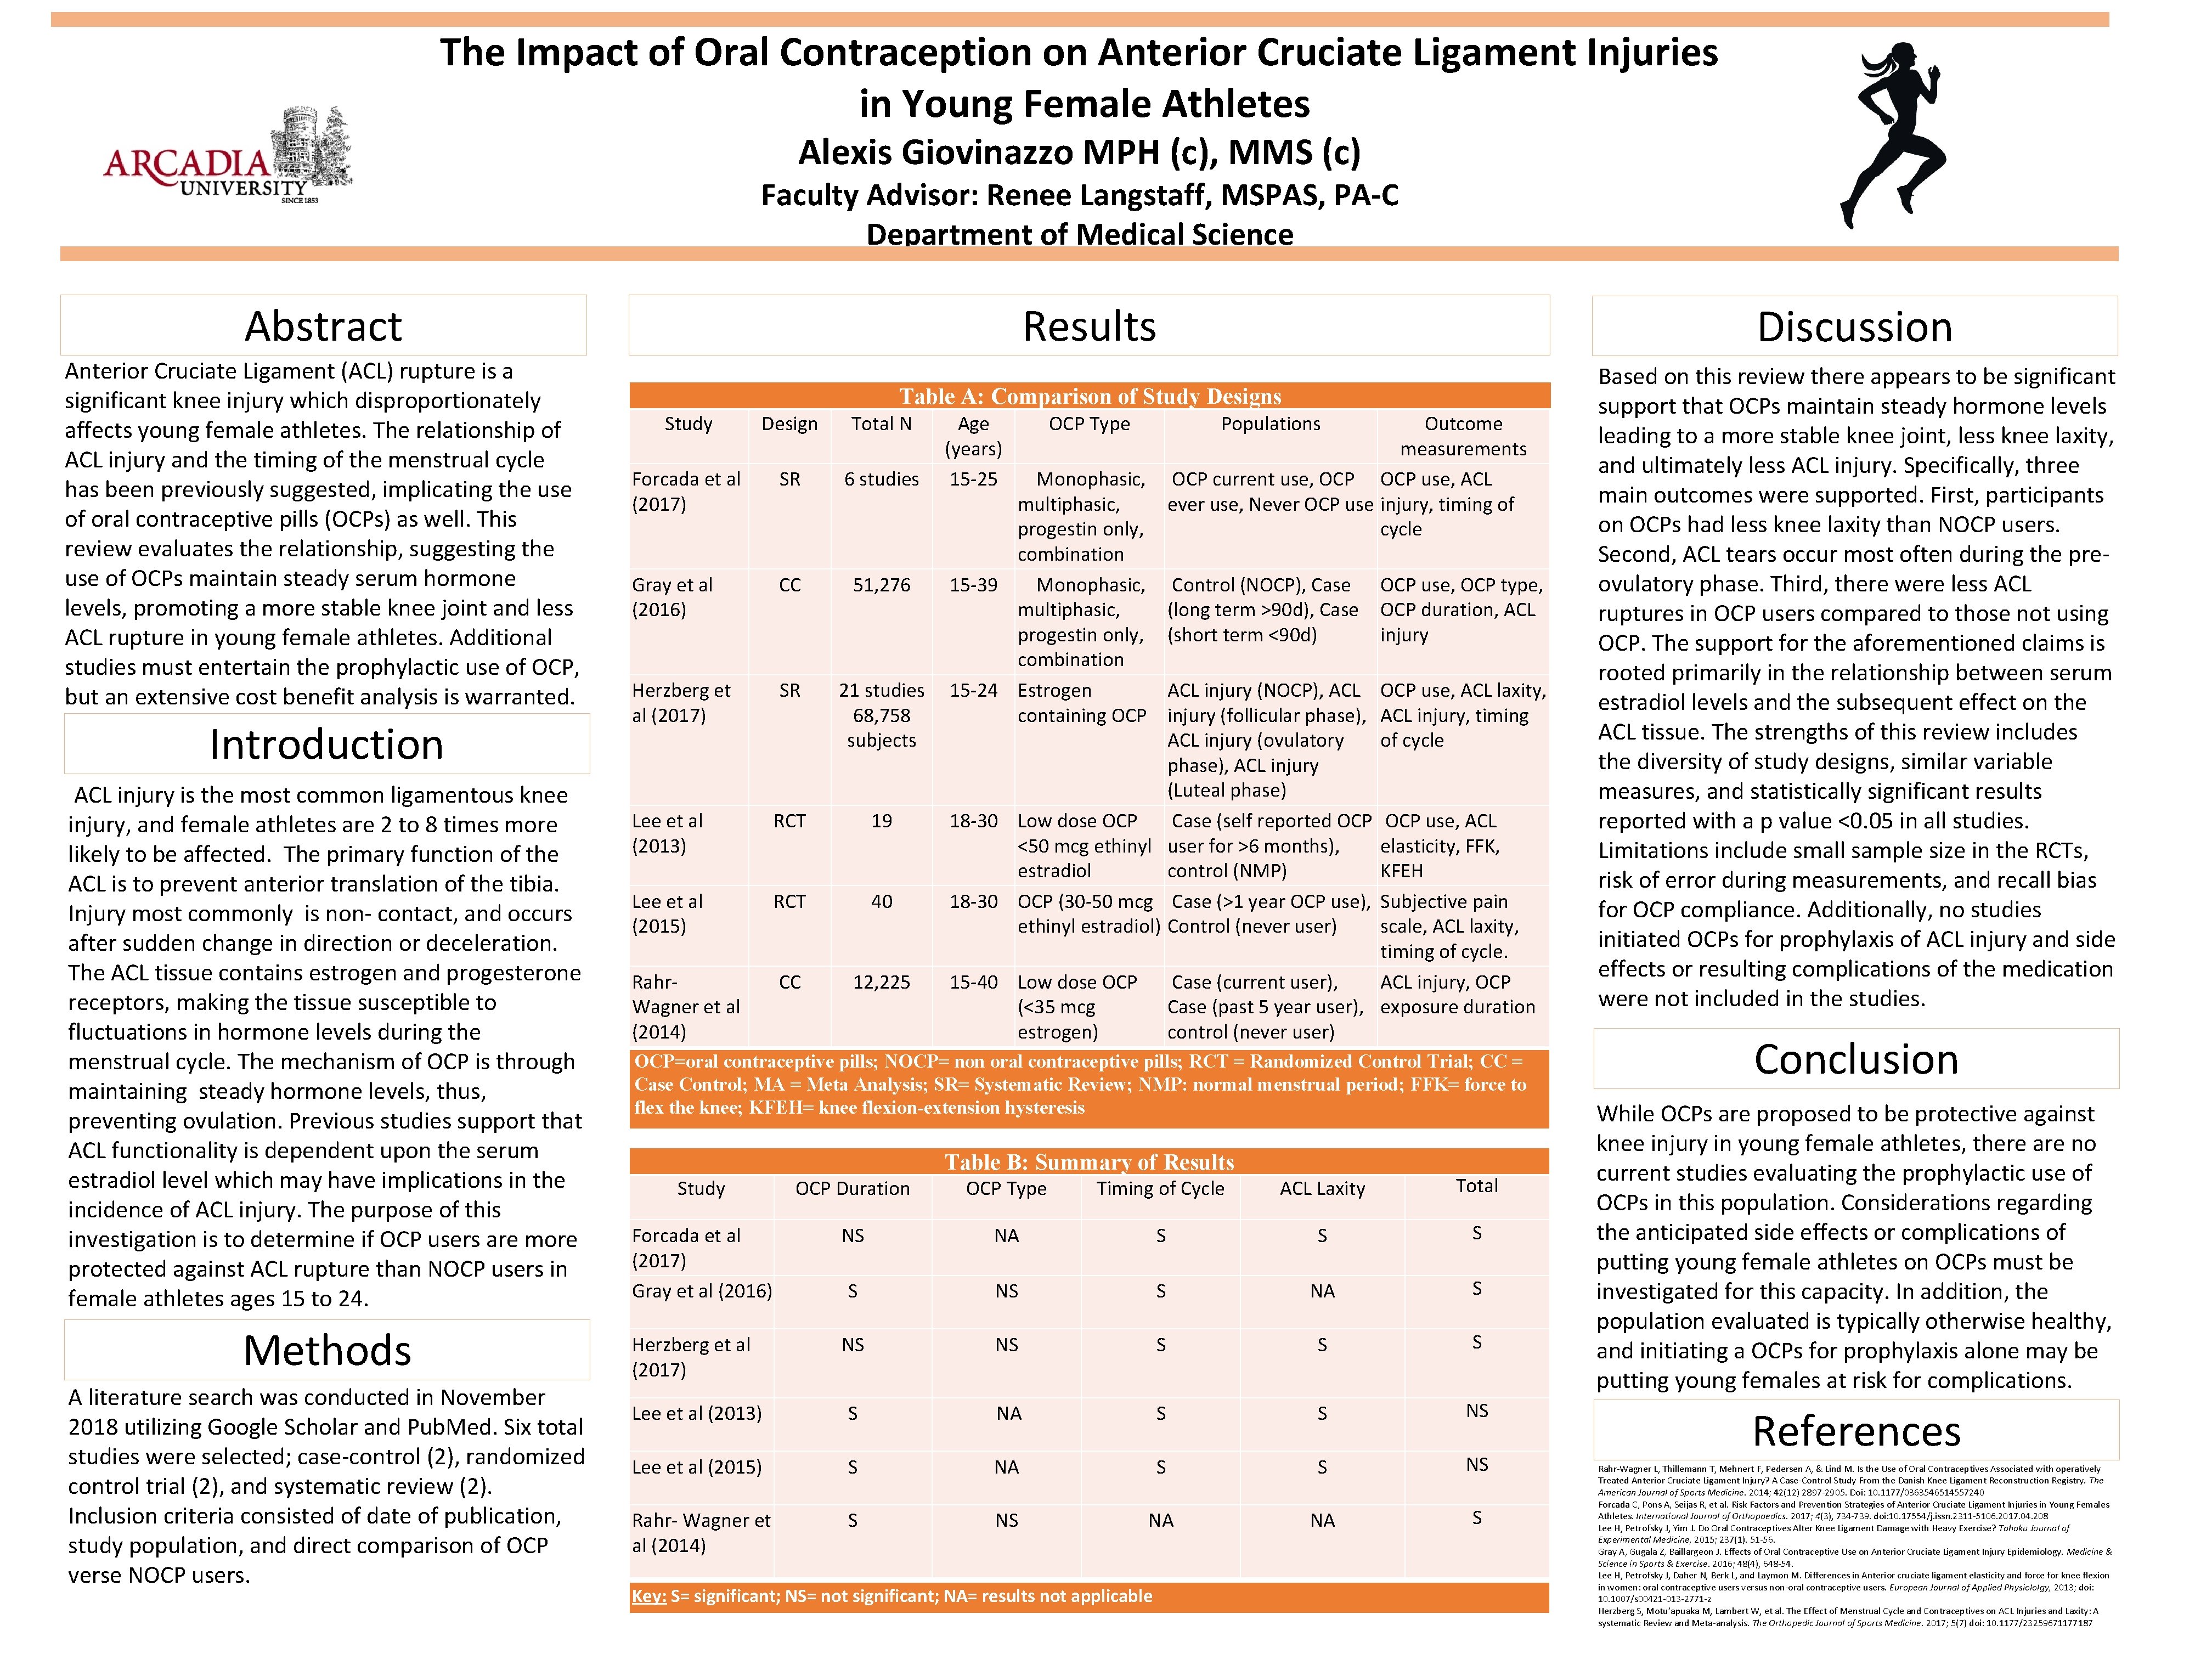 The Impact of Oral Contraception on Anterior Cruciate Ligament Injuries in Young Female Athletes